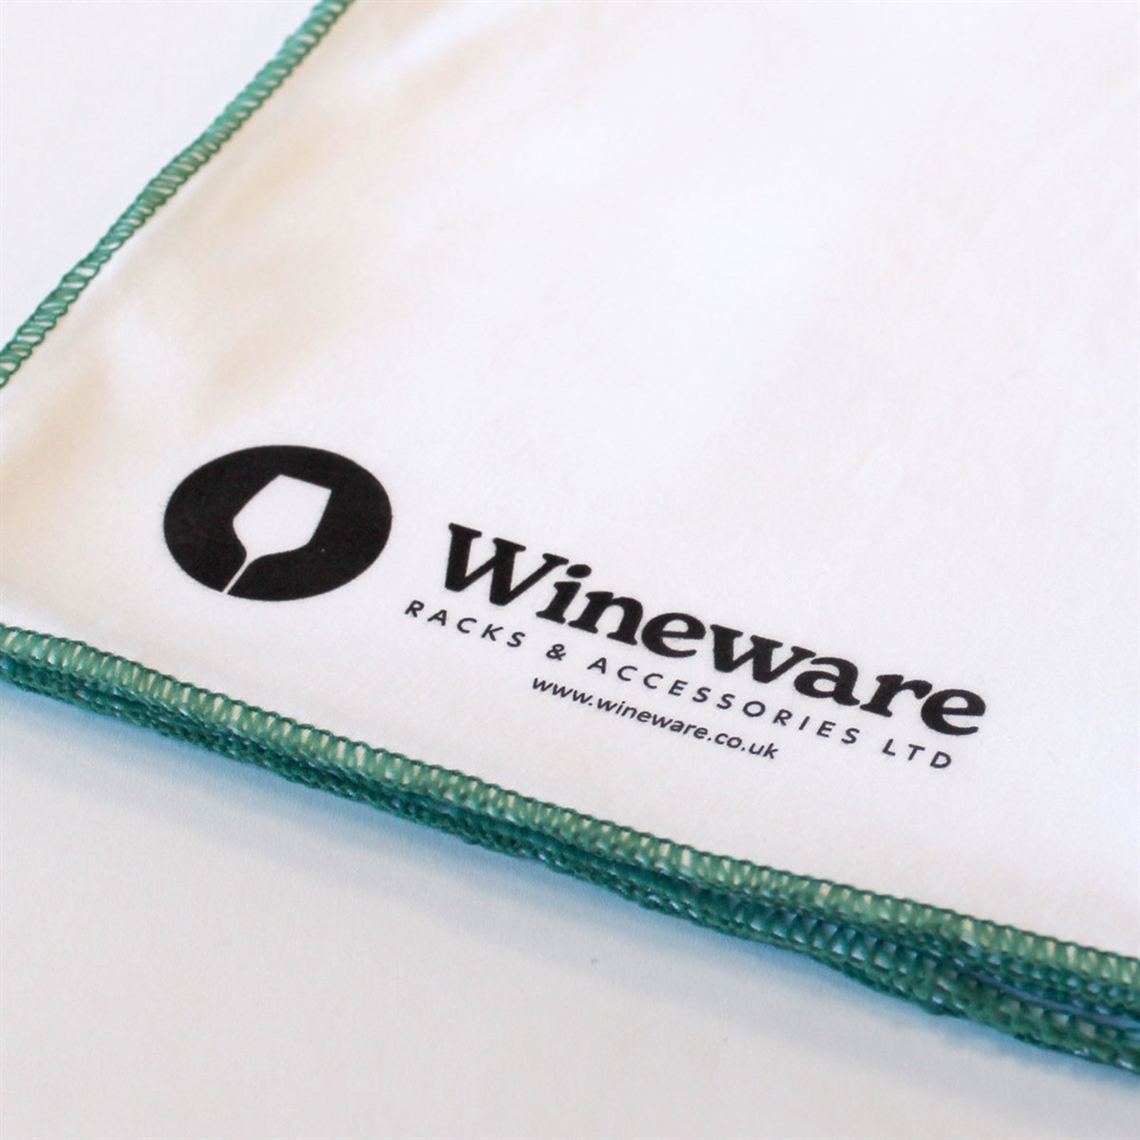 View more schott zwiesel from our Wine Glass Cleaning & Accessories range